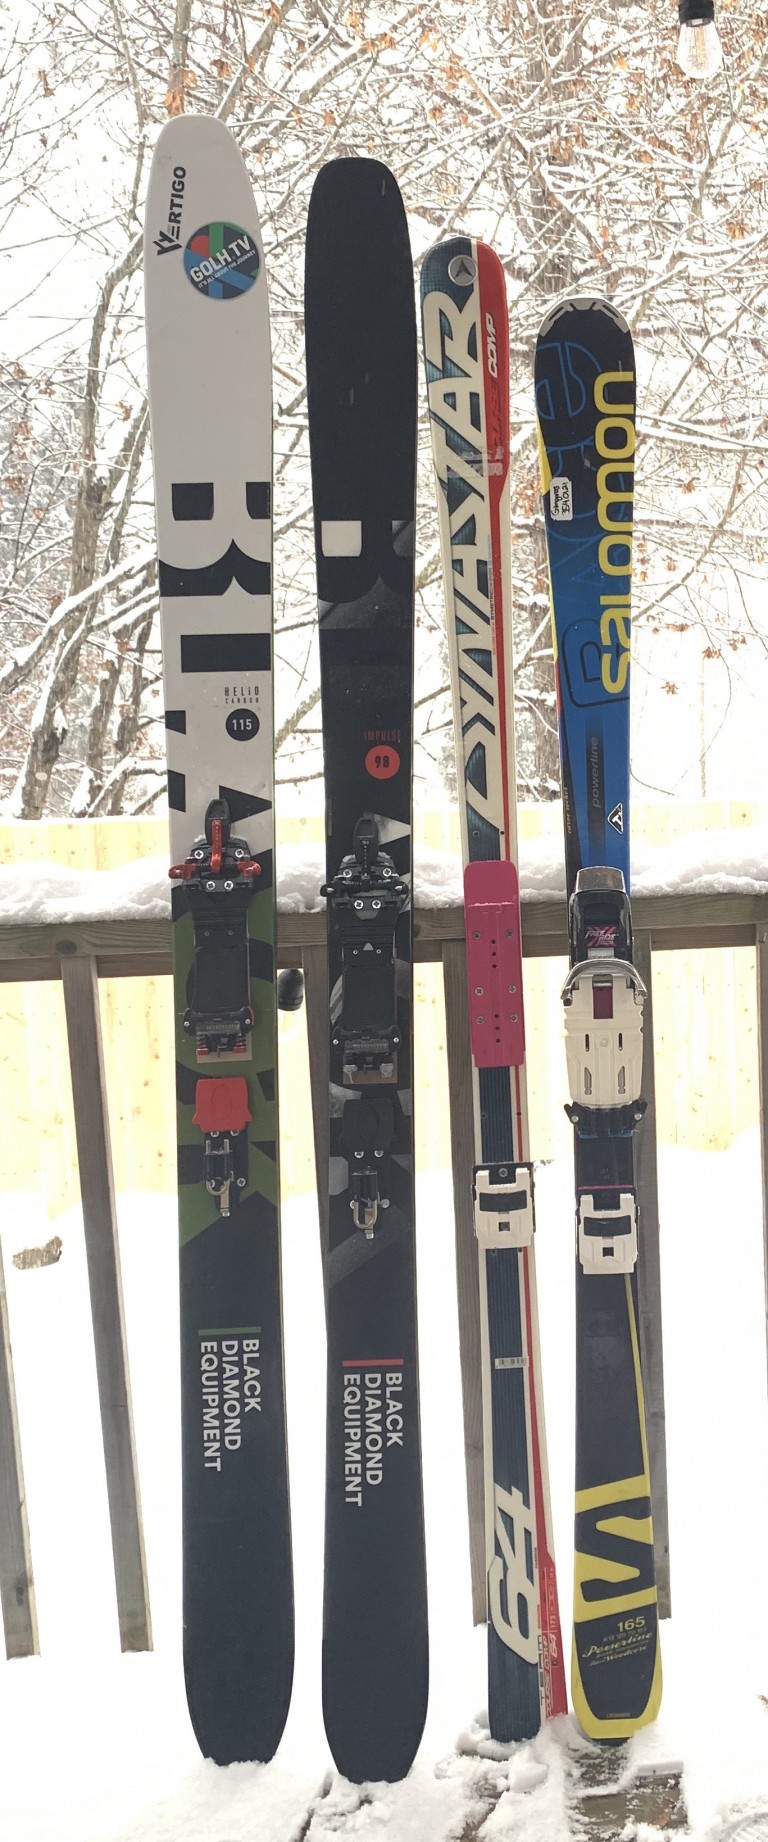 My Quest for the Best All Mountain Telemark Ski Absolute Telemark